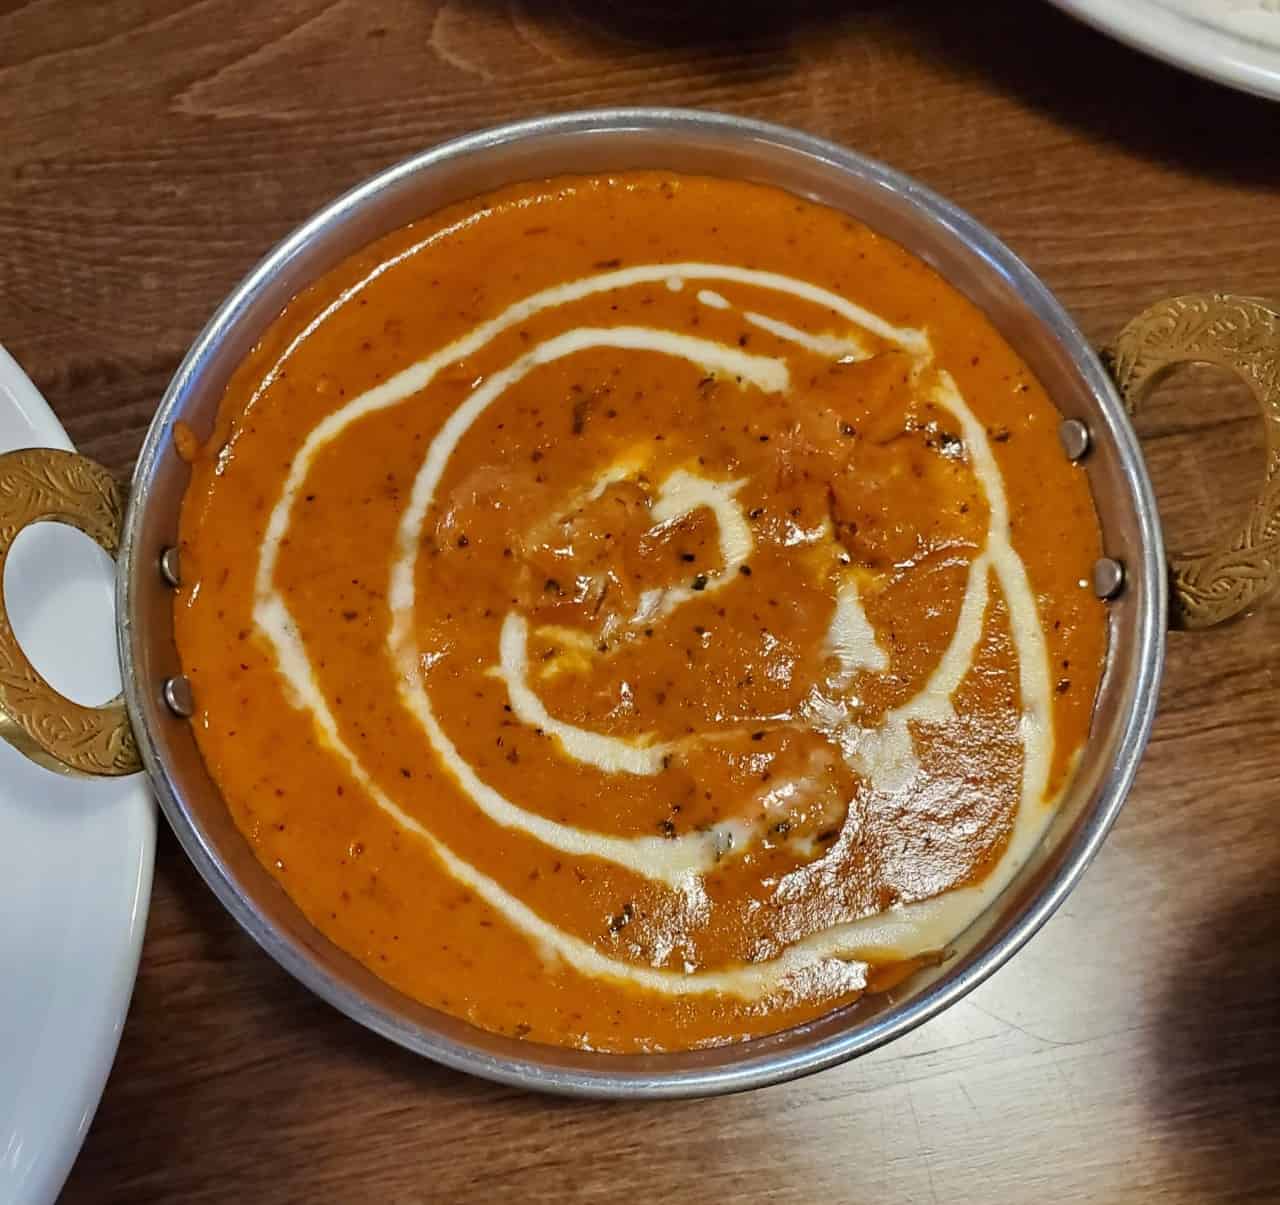 Butter Chicken from Indian Bites in High River - I had to try their butter chicken offered on the menu. I got a side of white rice to go with it and of course some garlic naan. It was amazing!